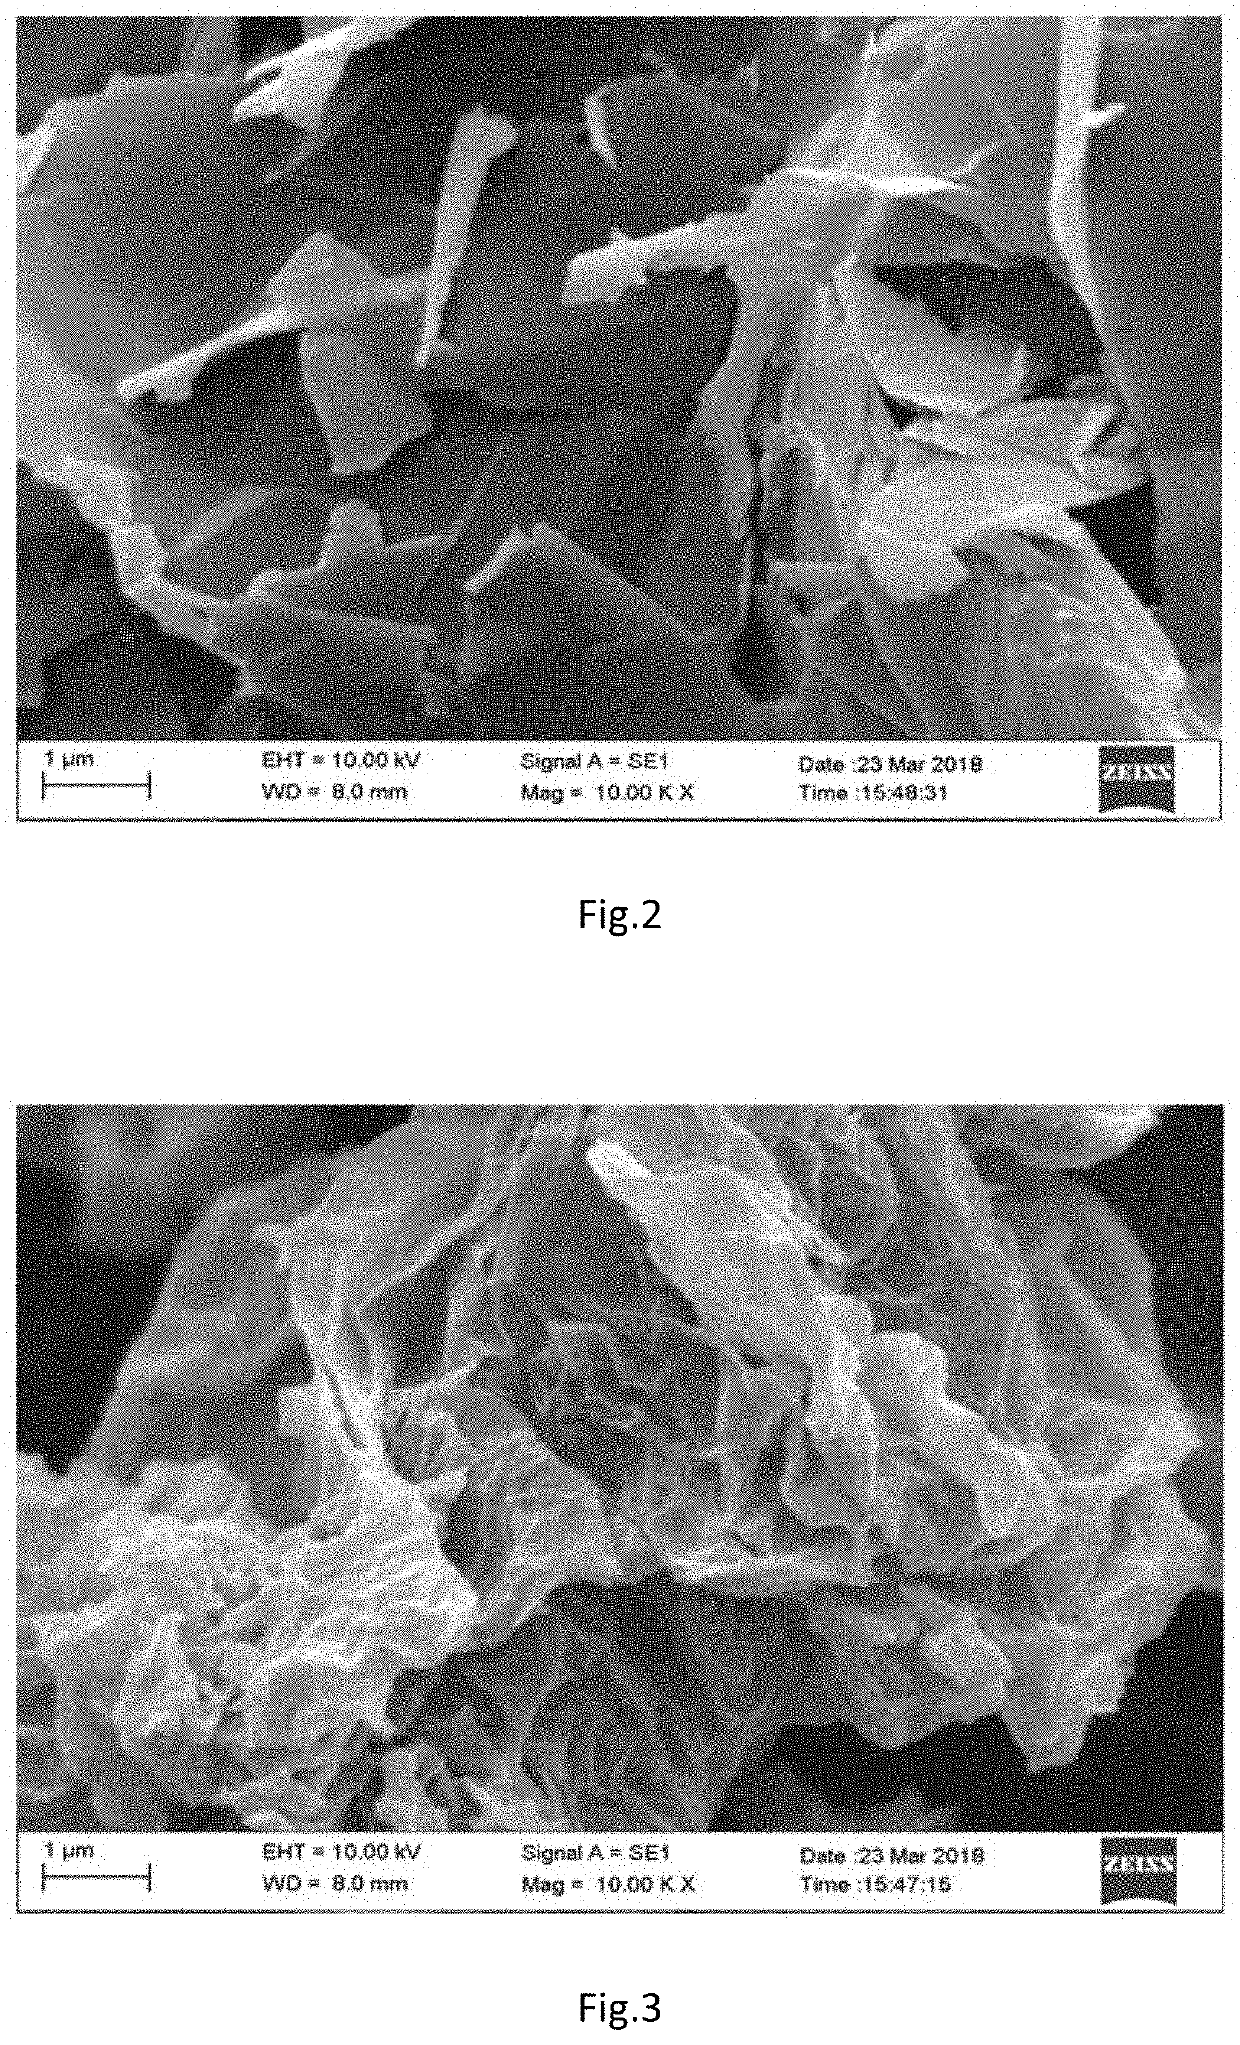 Intercalation agent for rapid graphite exfoliation in mass production of high-quality graphene